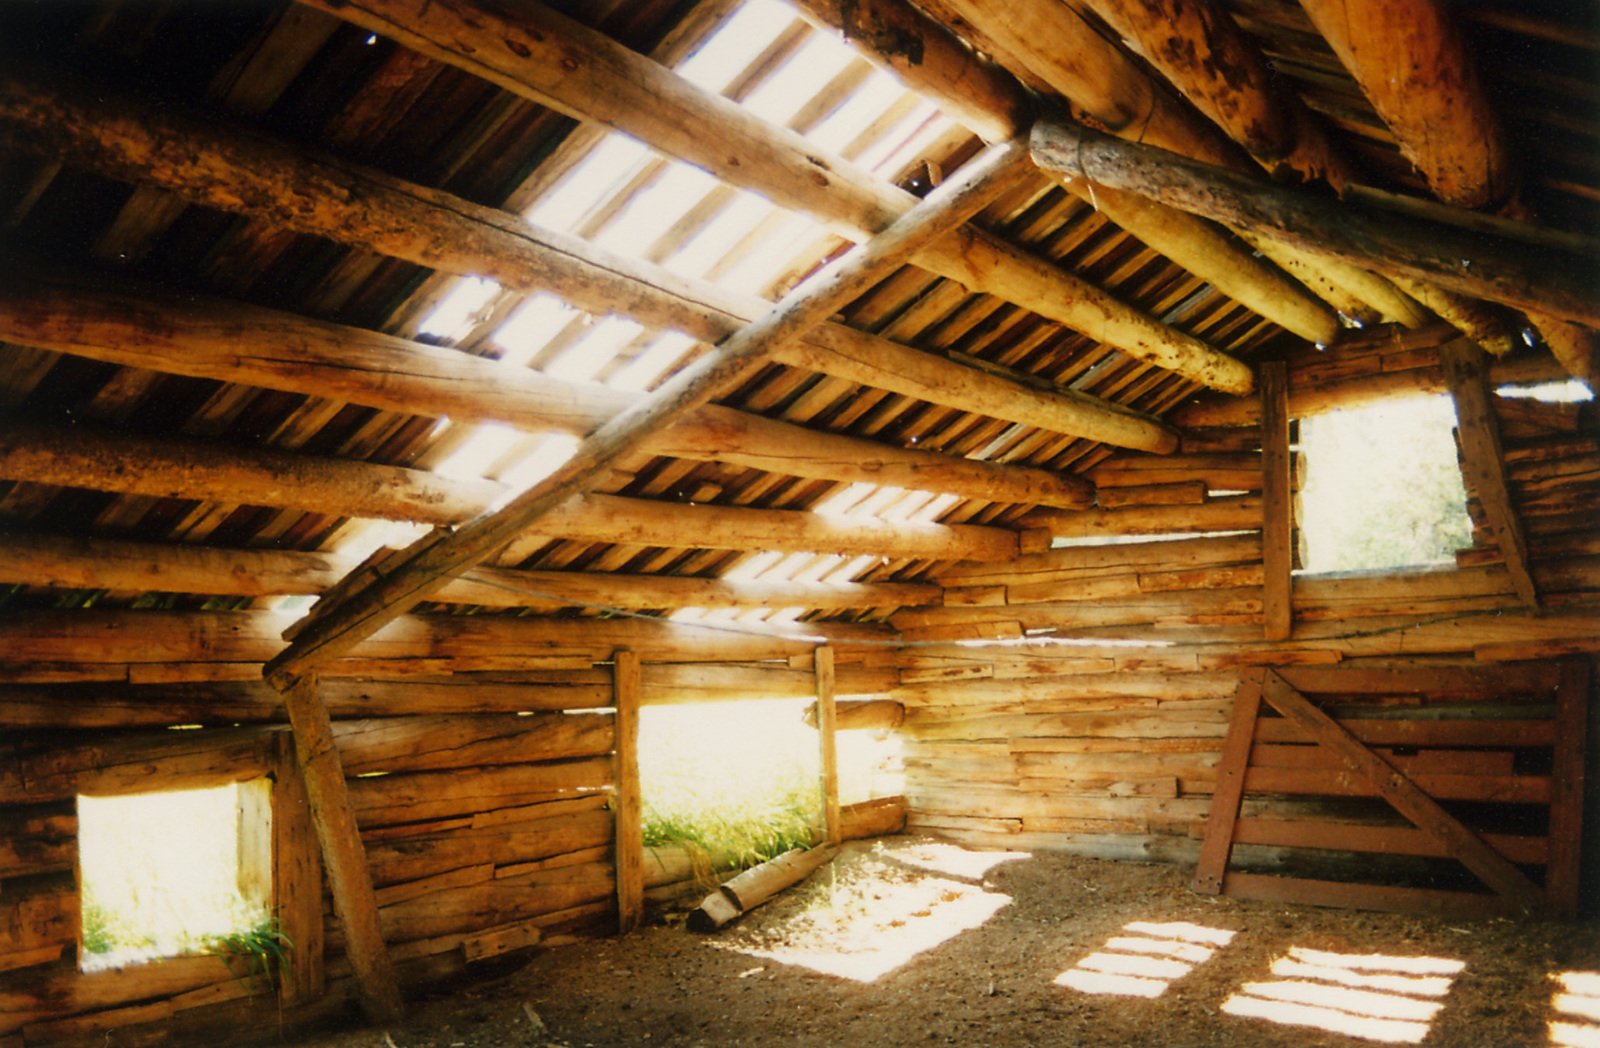 sunlight shines through the windows in an old attic